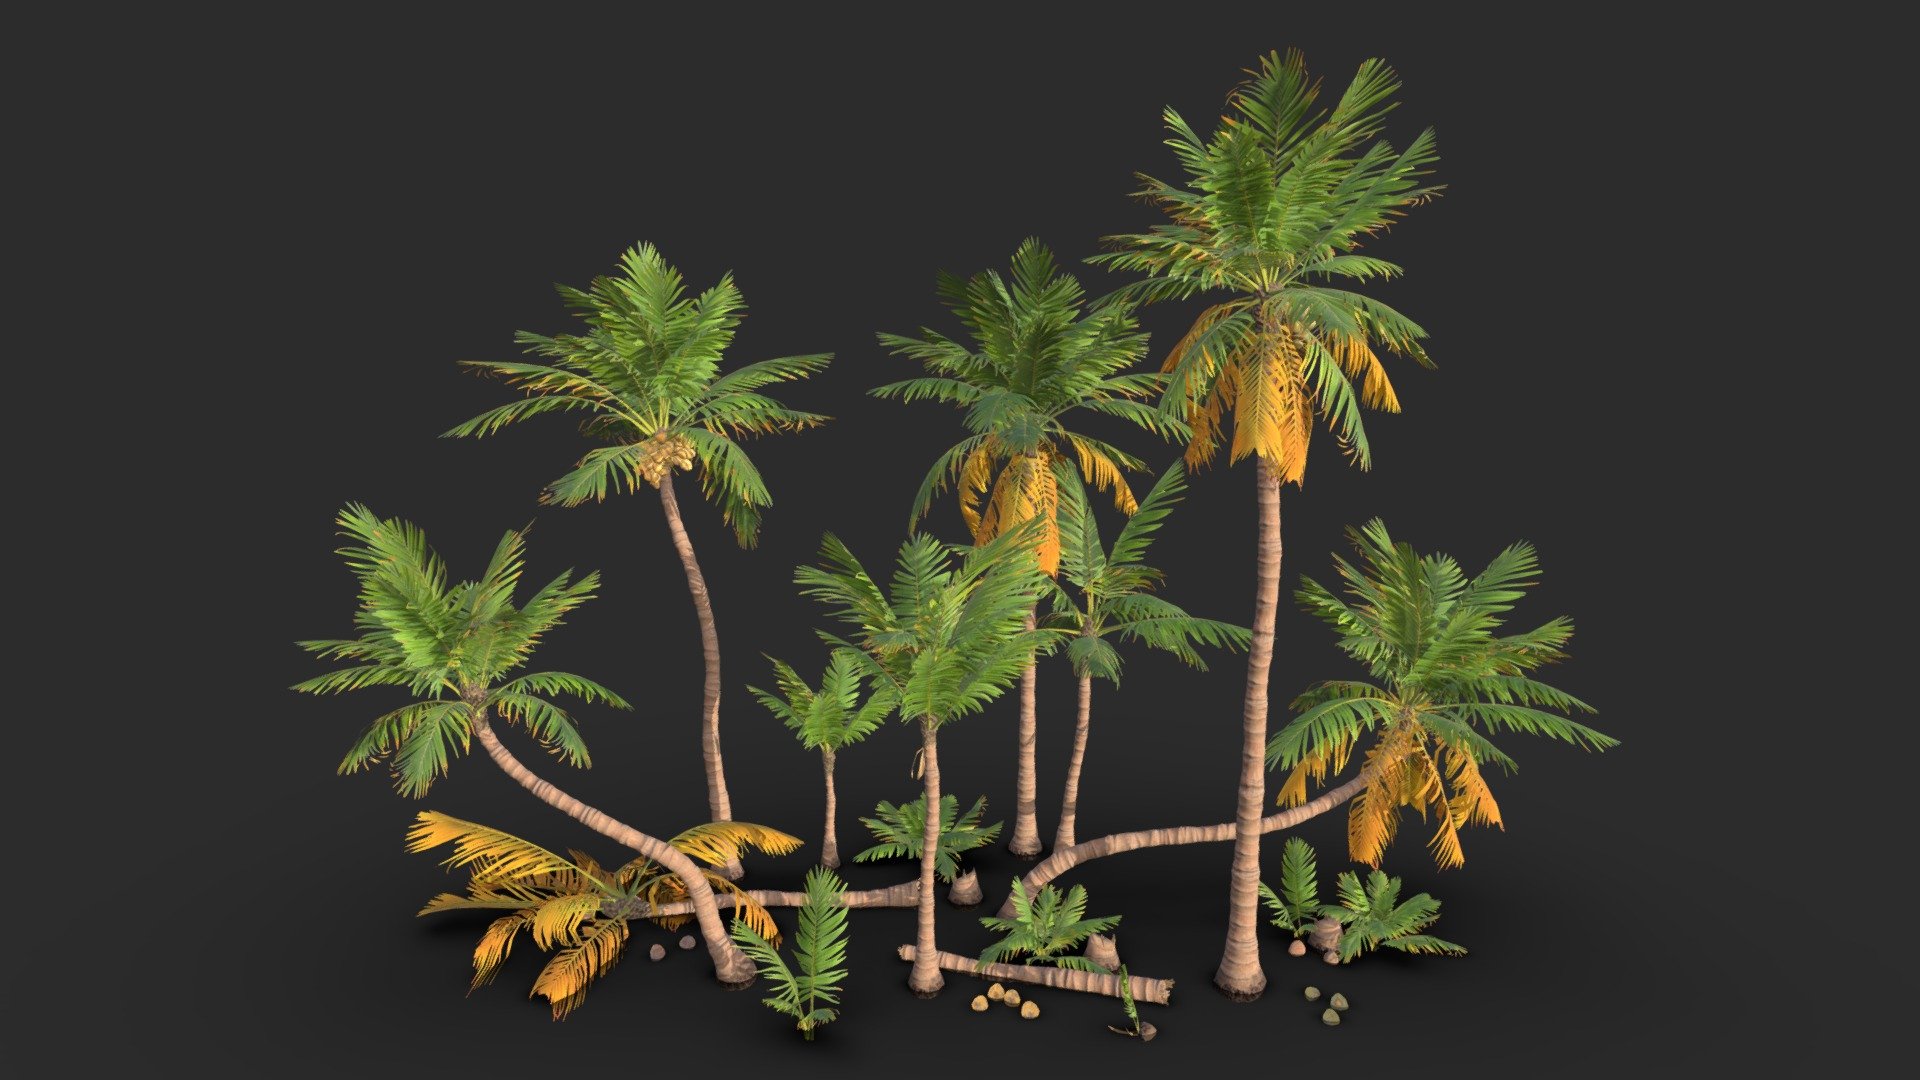 This Coconut Palm Tree (Cocos Nucifera) set includes 5 LODs. The pack of palm trees includes 8 different tropical palm shrubs and a modular set including 20 trunks and 13 foliage’s heads, 4 young trees, 7 dead parts, 20 fruits variants and stacks, 26 prefabs.

All assets are ready for game and available in lowpoly and PBR ready and including Vertex color layer to add wind animation in Unreal Engine or in Blender.

The assets are available in realistic style and can be used in the environment of any games (post-apo, FPS, survival… ). All objects share a unique material for the best optimization for games.

Low-poly model &amp; Blender native 3.1

SPECIFICATIONS

Objects : 95
Polygons : 215311
Render engine : Eevee (Cycles ready)

GAME SPECS

LODs : Yes (inside FBX for Unity &amp; Unreal)
Numbers of LODs : 5
Collider : Yes

FORMATS

FBX
Collada
OBJ
uasset

TEXTURES

Materials in scene : 1
Textures sizes : 2K
Textures types : Base Color, Metallic, Roughness, Normal (DirectX &amp; OpenGL), Heigh, Opacity &amp; AO - Coconut Palm Trees - Modular Set - Buy Royalty Free 3D model by KangaroOz 3D (@KangaroOz-3D) 3d model